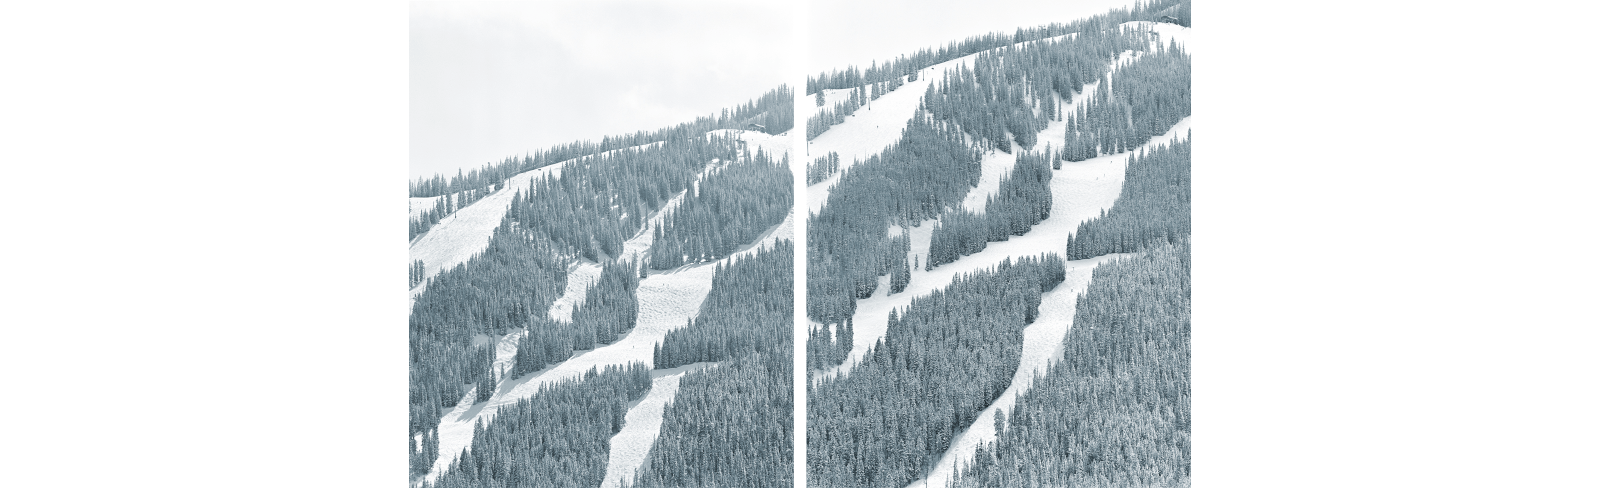 a collage of a ski slope